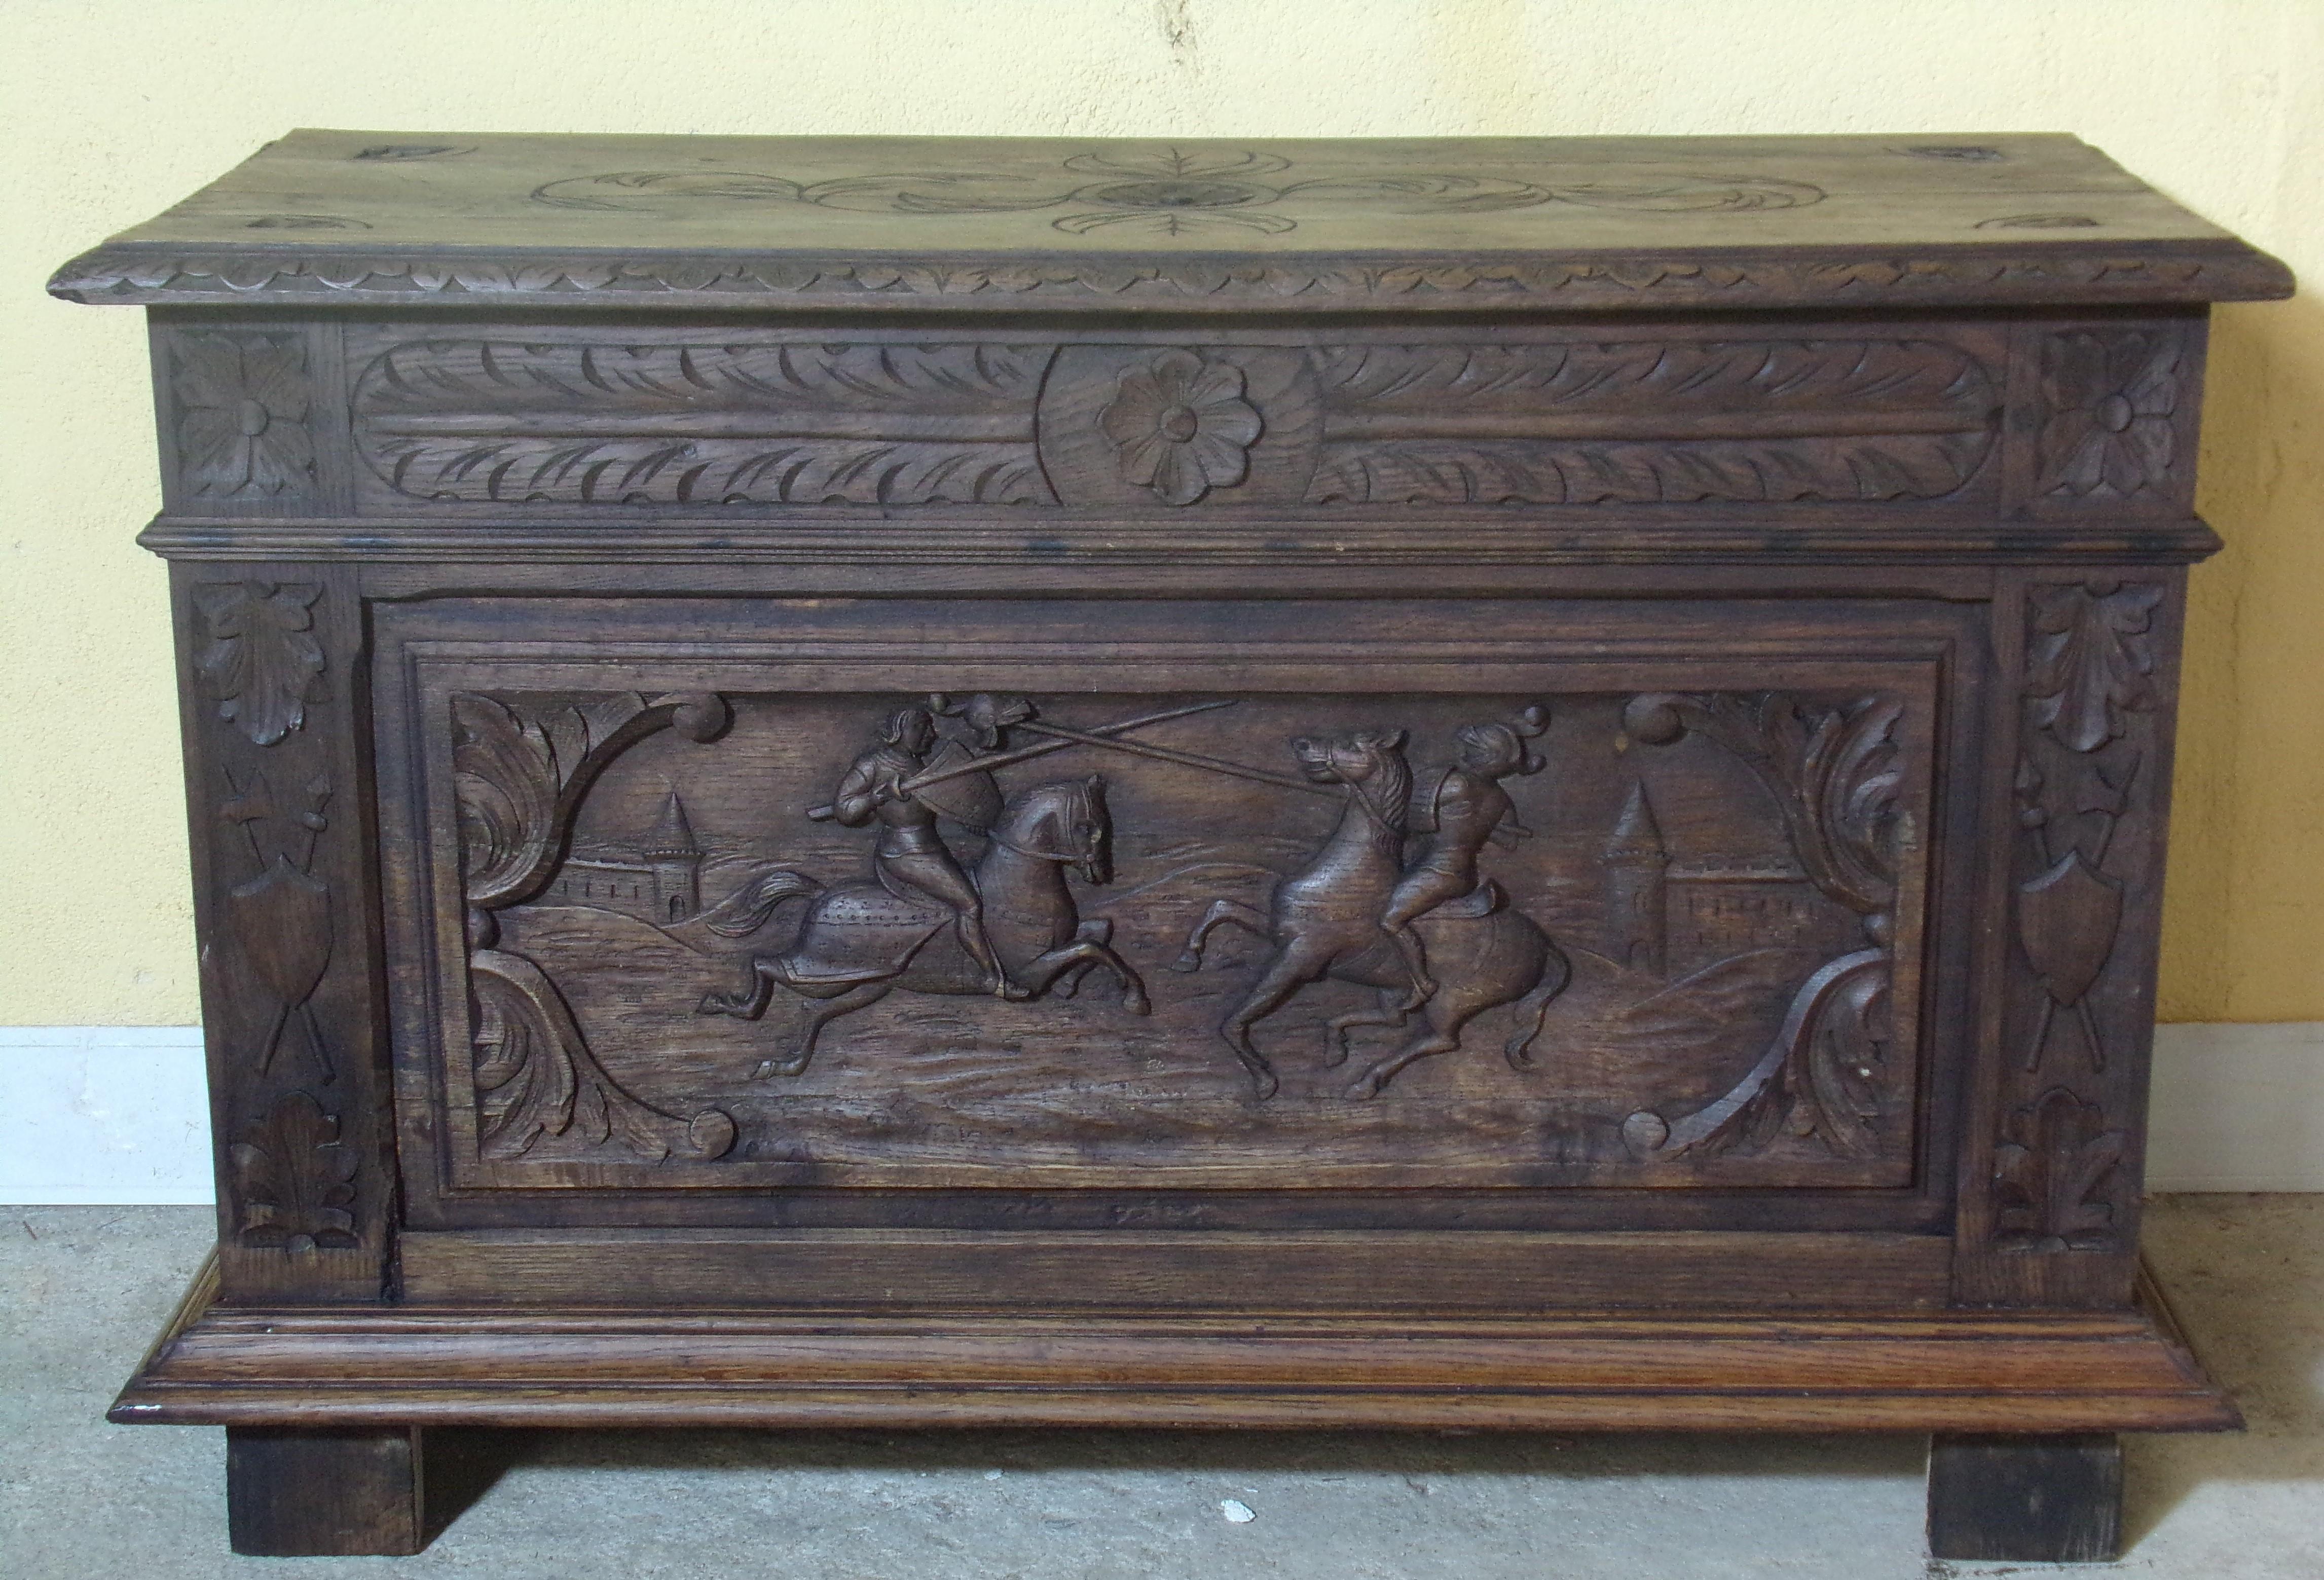 A most unusual hand carved oak coffer depicting Jousting Knights in the Renaissance Revival style, C 1880.